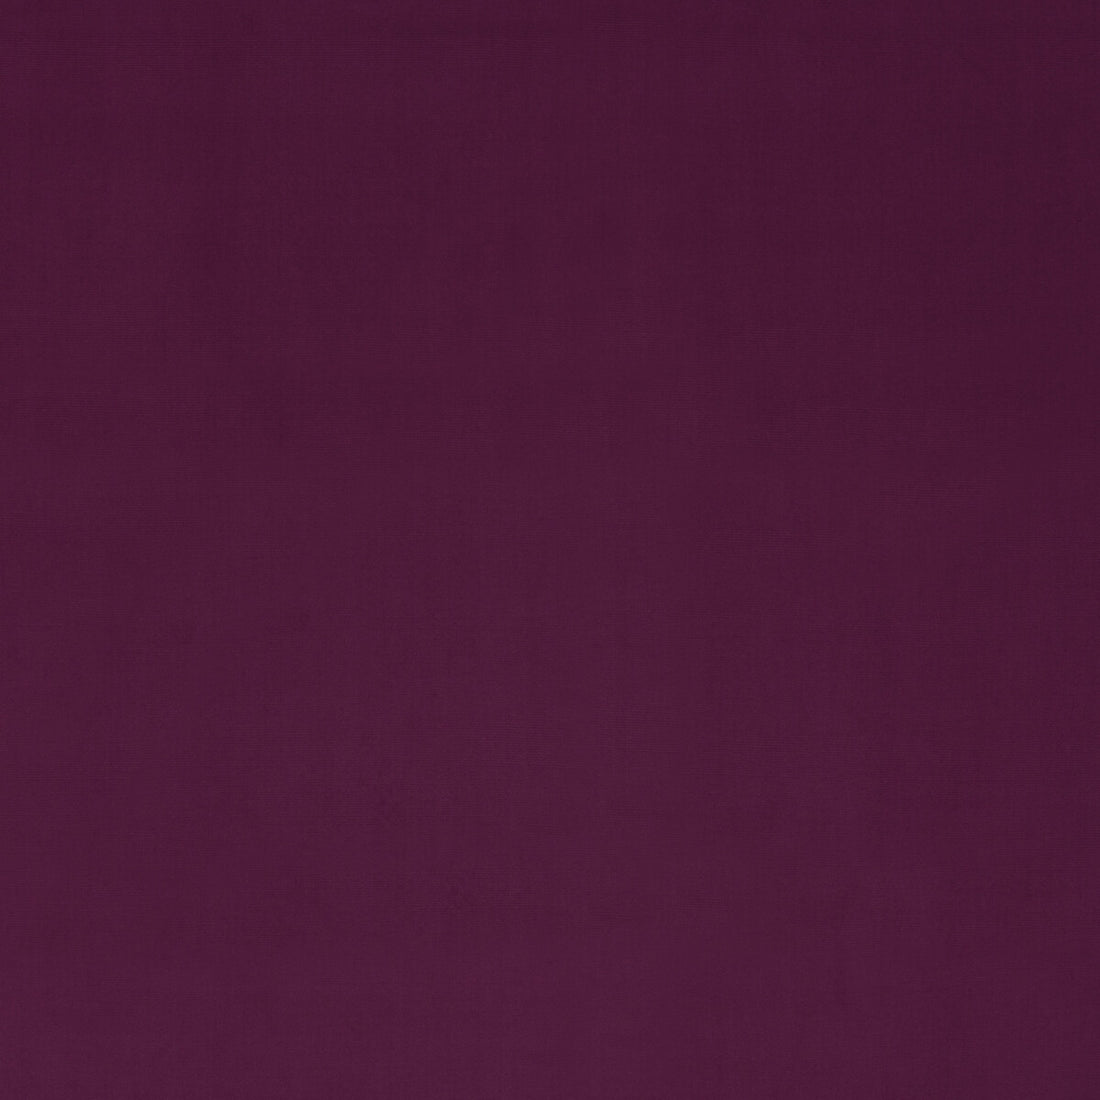 Milborne fabric in damson color - pattern PF50411.560.0 - by Baker Lifestyle in the Notebooks collection